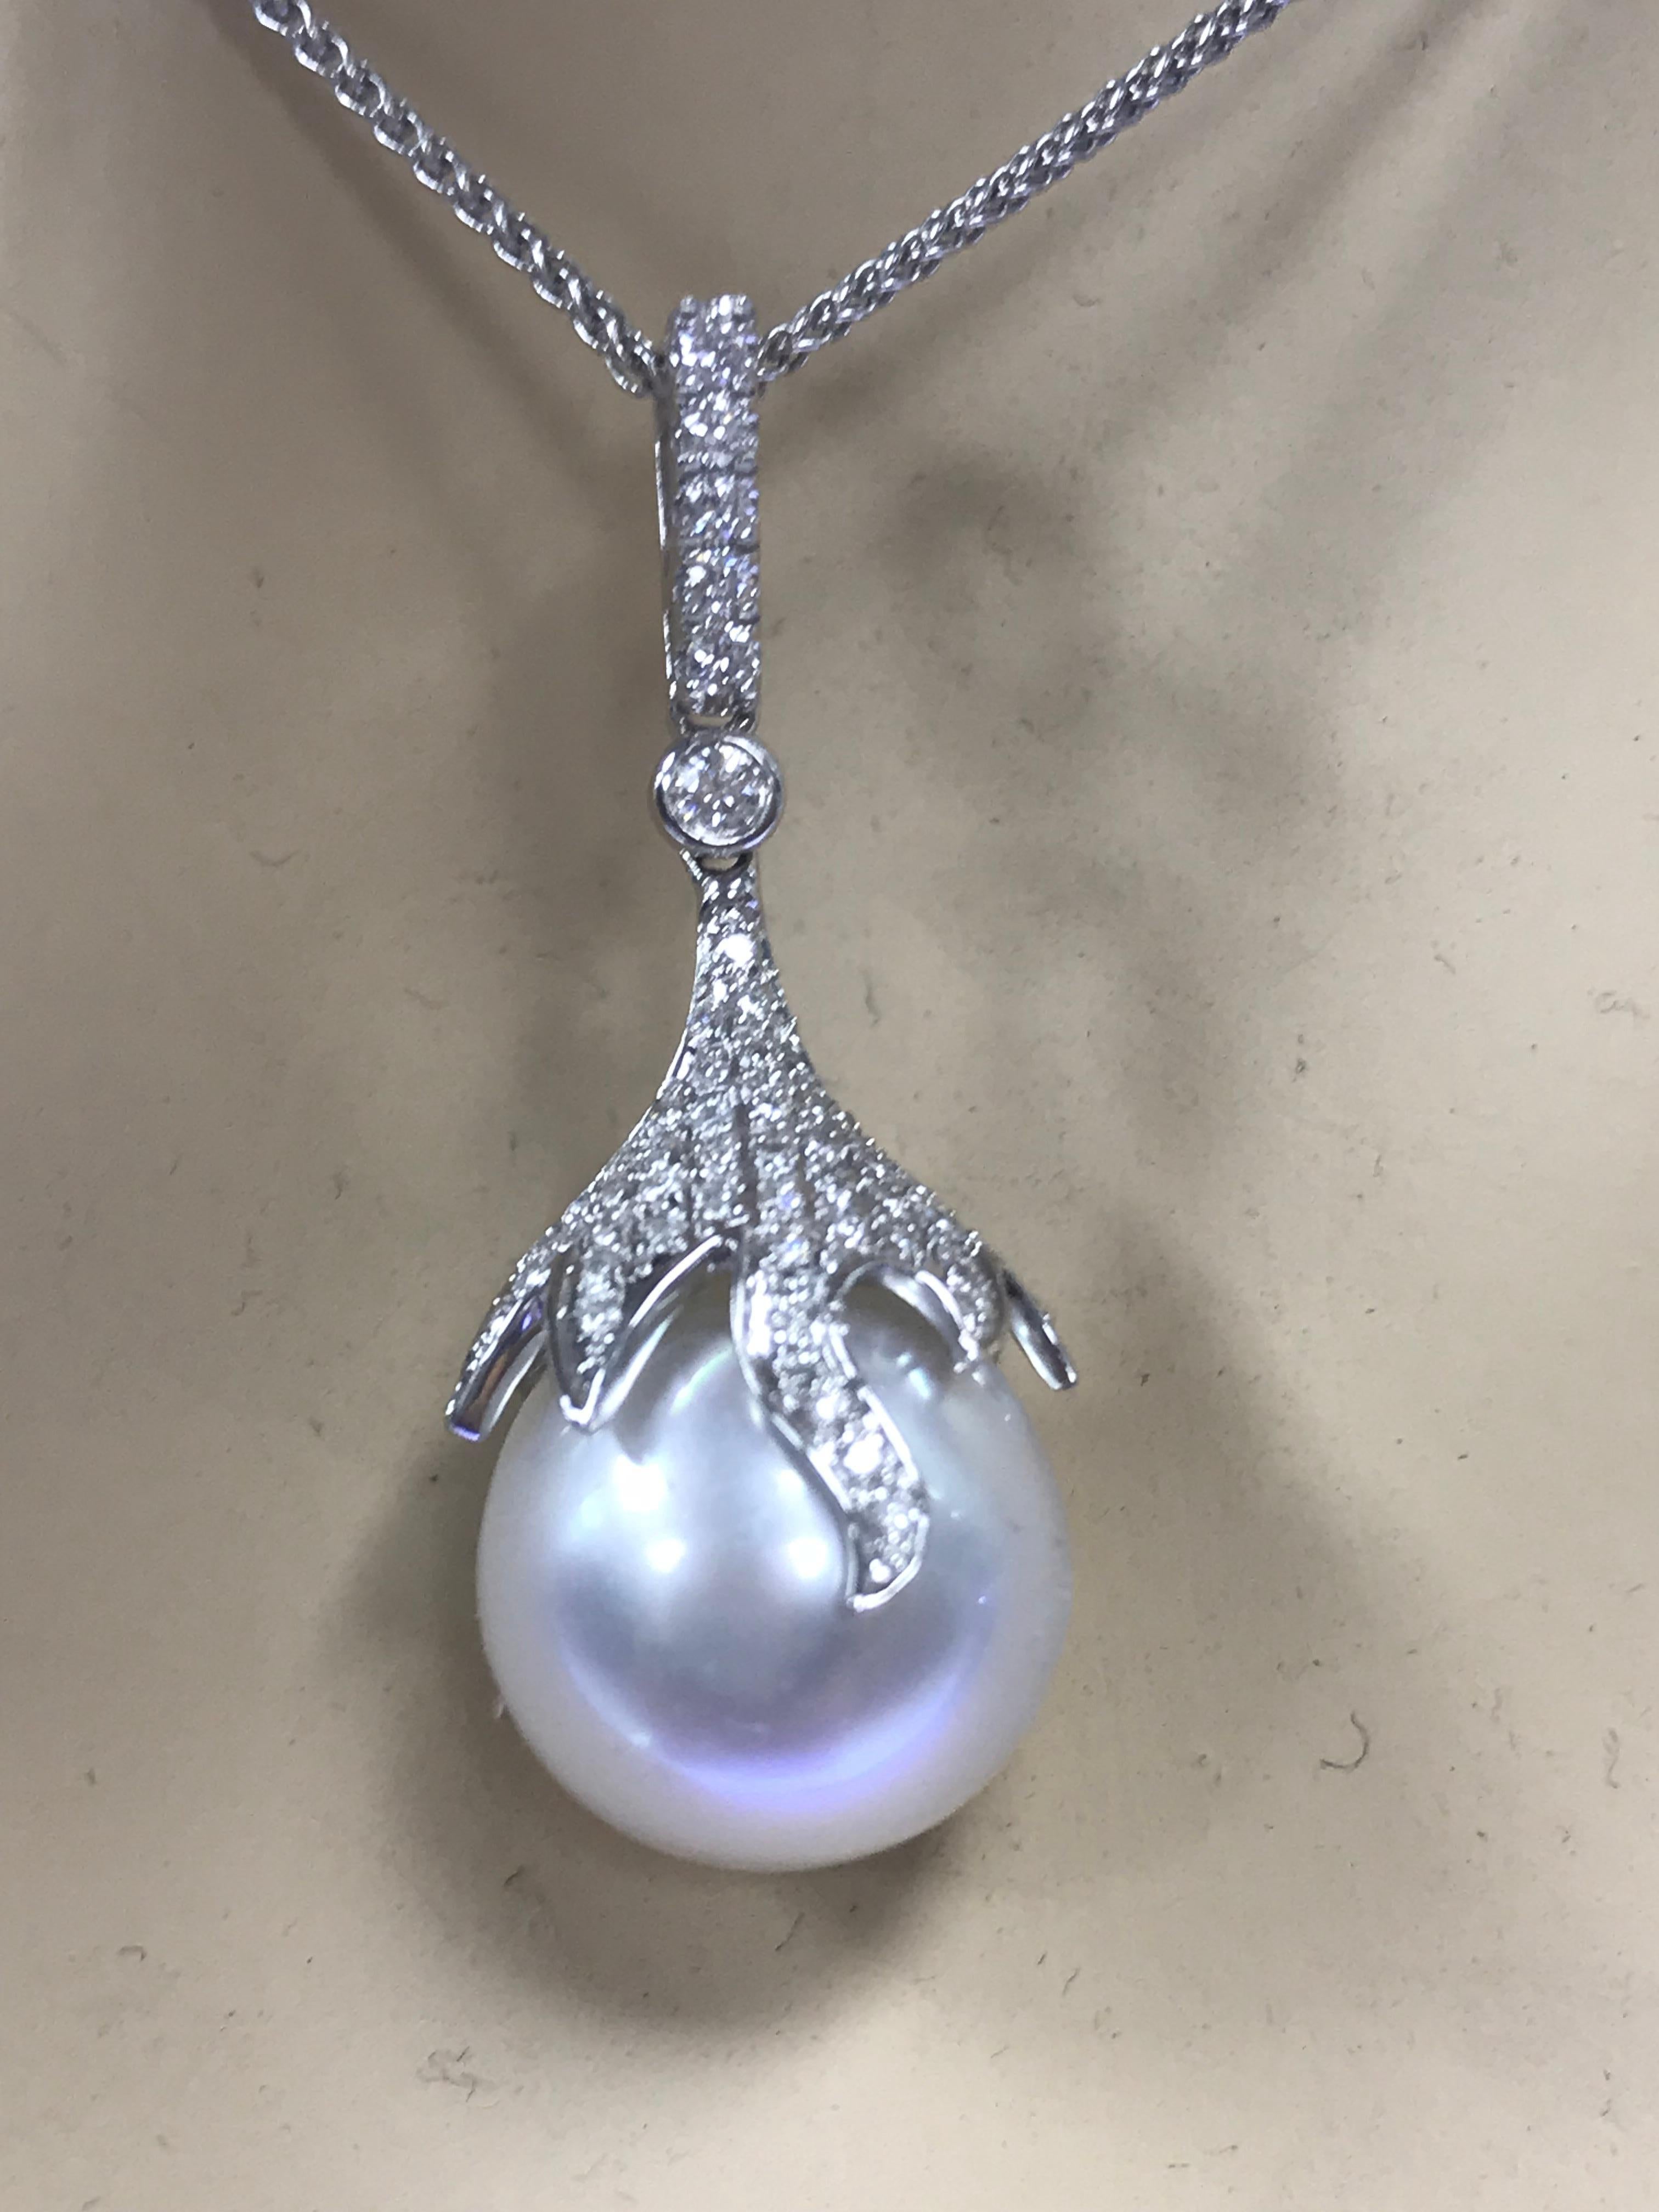 Nature	South Sea Cultured Pearl
Pearl Quality	AAA
Luster	AAA, Excellent
Nacre	Very Thick
Jewelry Style	Pendant
Metal Purity	18K
Metal Type	White Gold
Stone Shape 1	Round
Stone Count 1	57
Stone Weight 1	0.32 ct.
Stone Color 1	G+